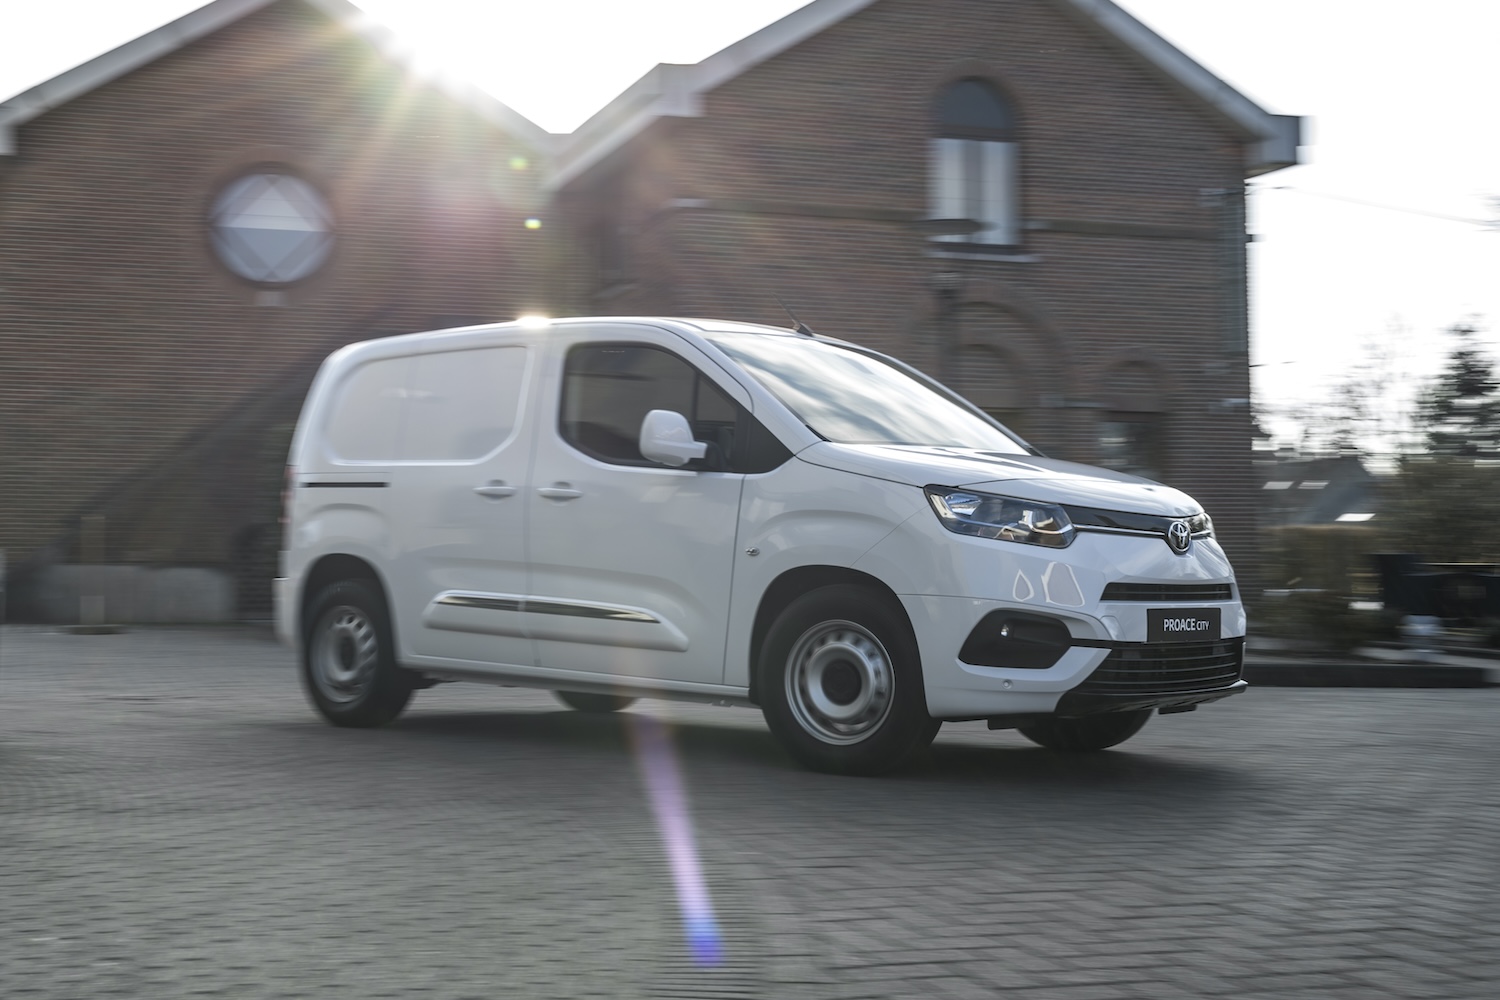 Van Reviews | Can I purchase a van as my first vehicle? | CompleteVan.ie